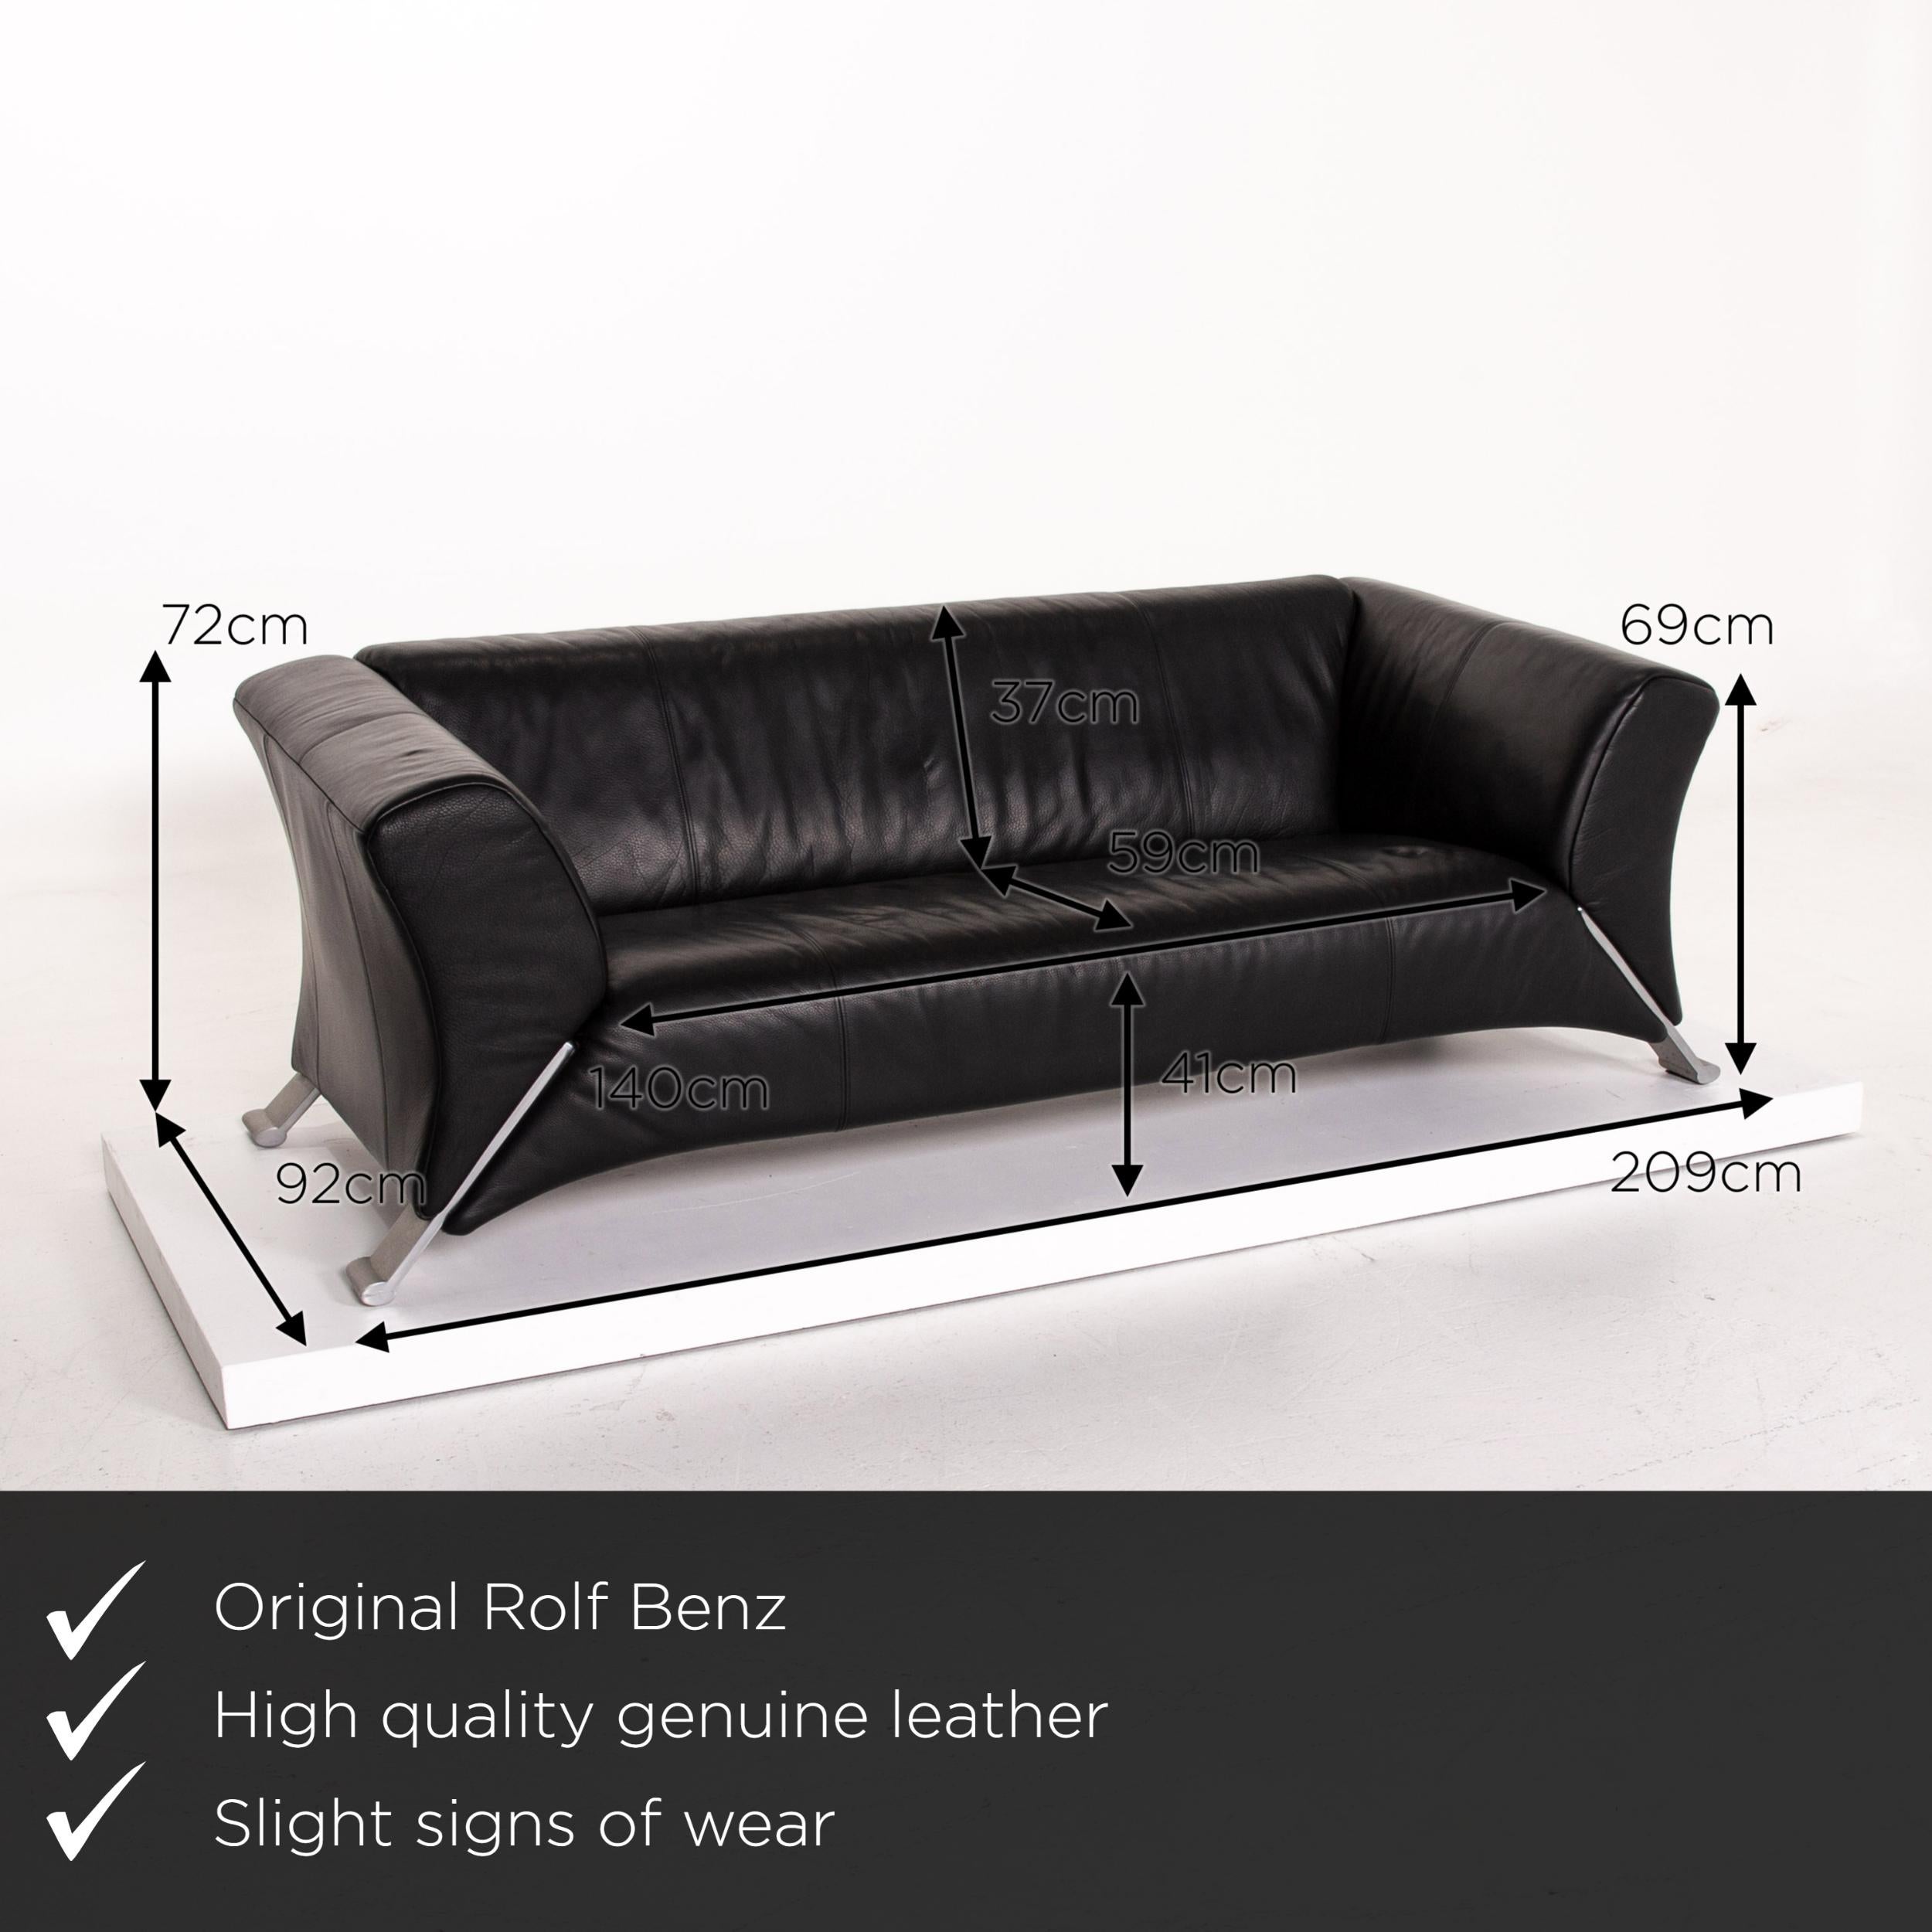 We present to you a Rolf Benz 322 leather sofa set black 1 three-seat 1 two-seat couch.
 

 Product measurements in centimeters:
 

Depth 92
Width 209
Height 72
Seat height 41
Rest height 69
Seat depth 59
Seat width 140
Back height